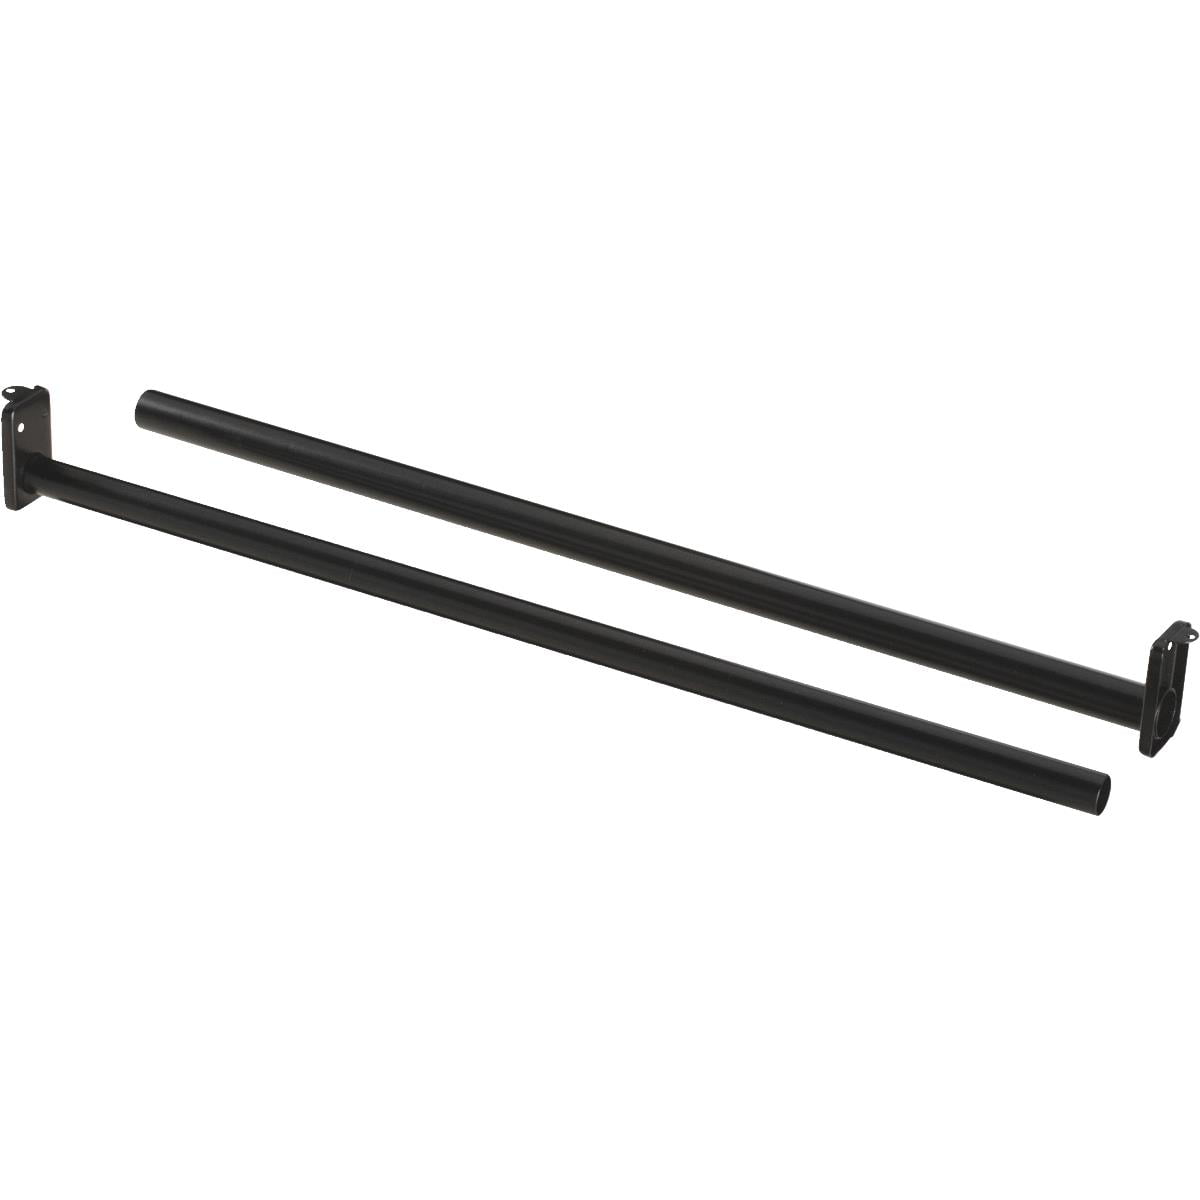 National 72 In. To 120 In. Adjustable Closet Rod, Oil Rubbed Bronze ...